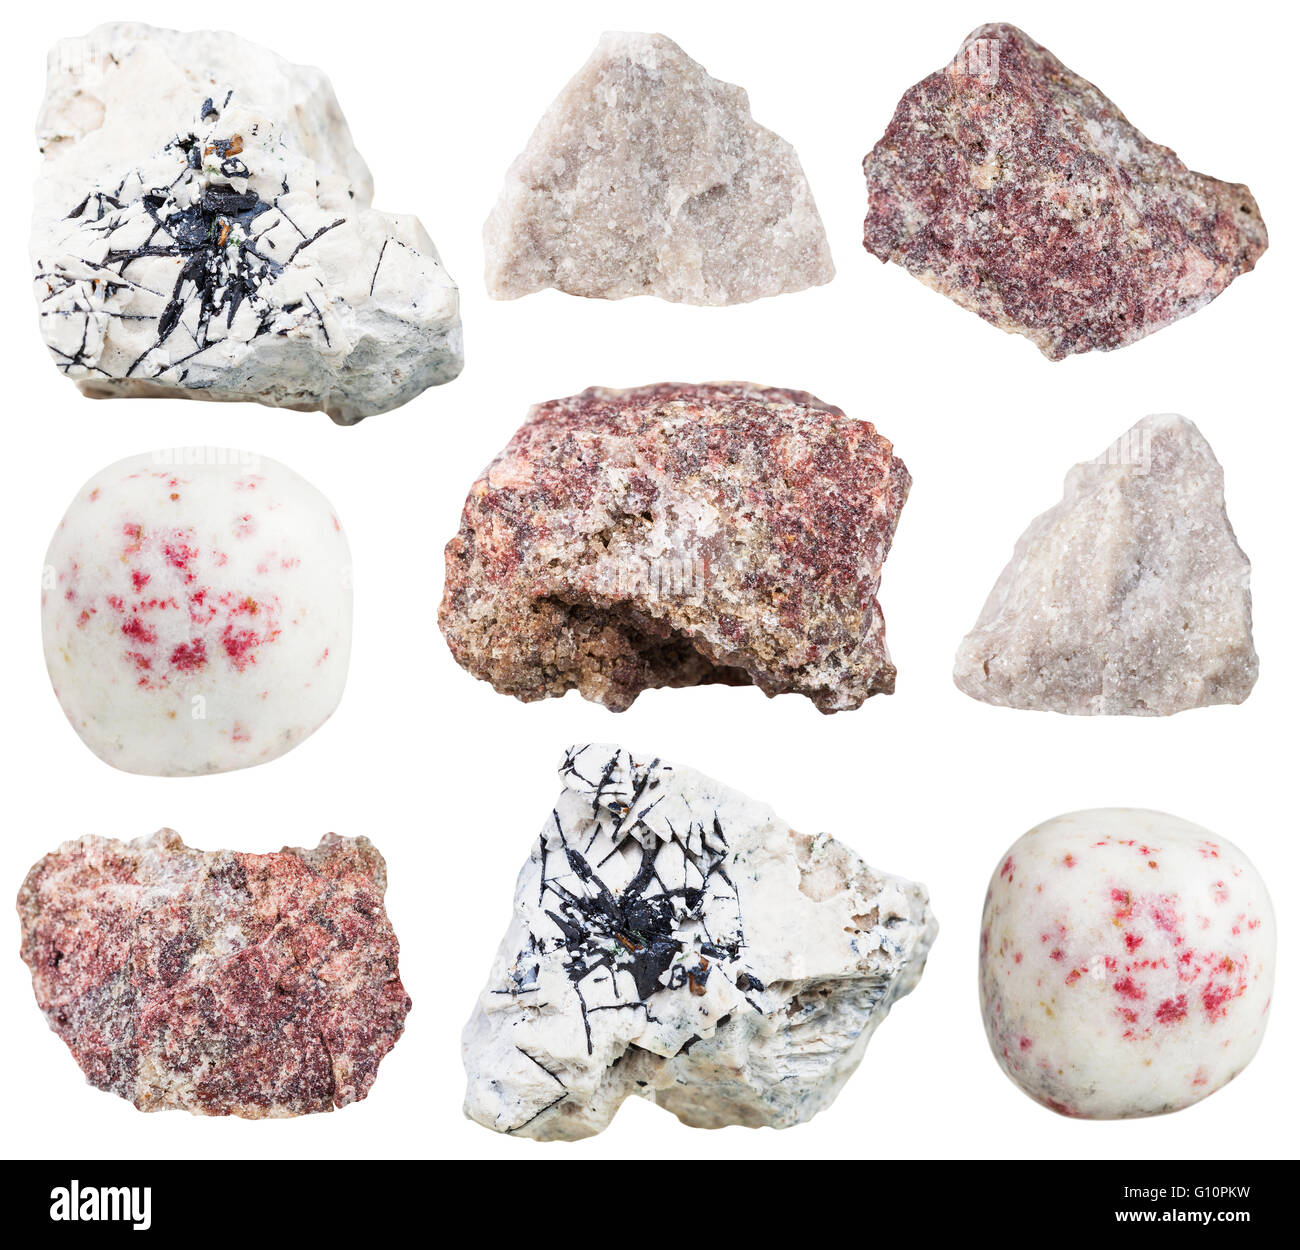 set of various dolomite natural mineral stones and rocks isolated on white background Stock Photo